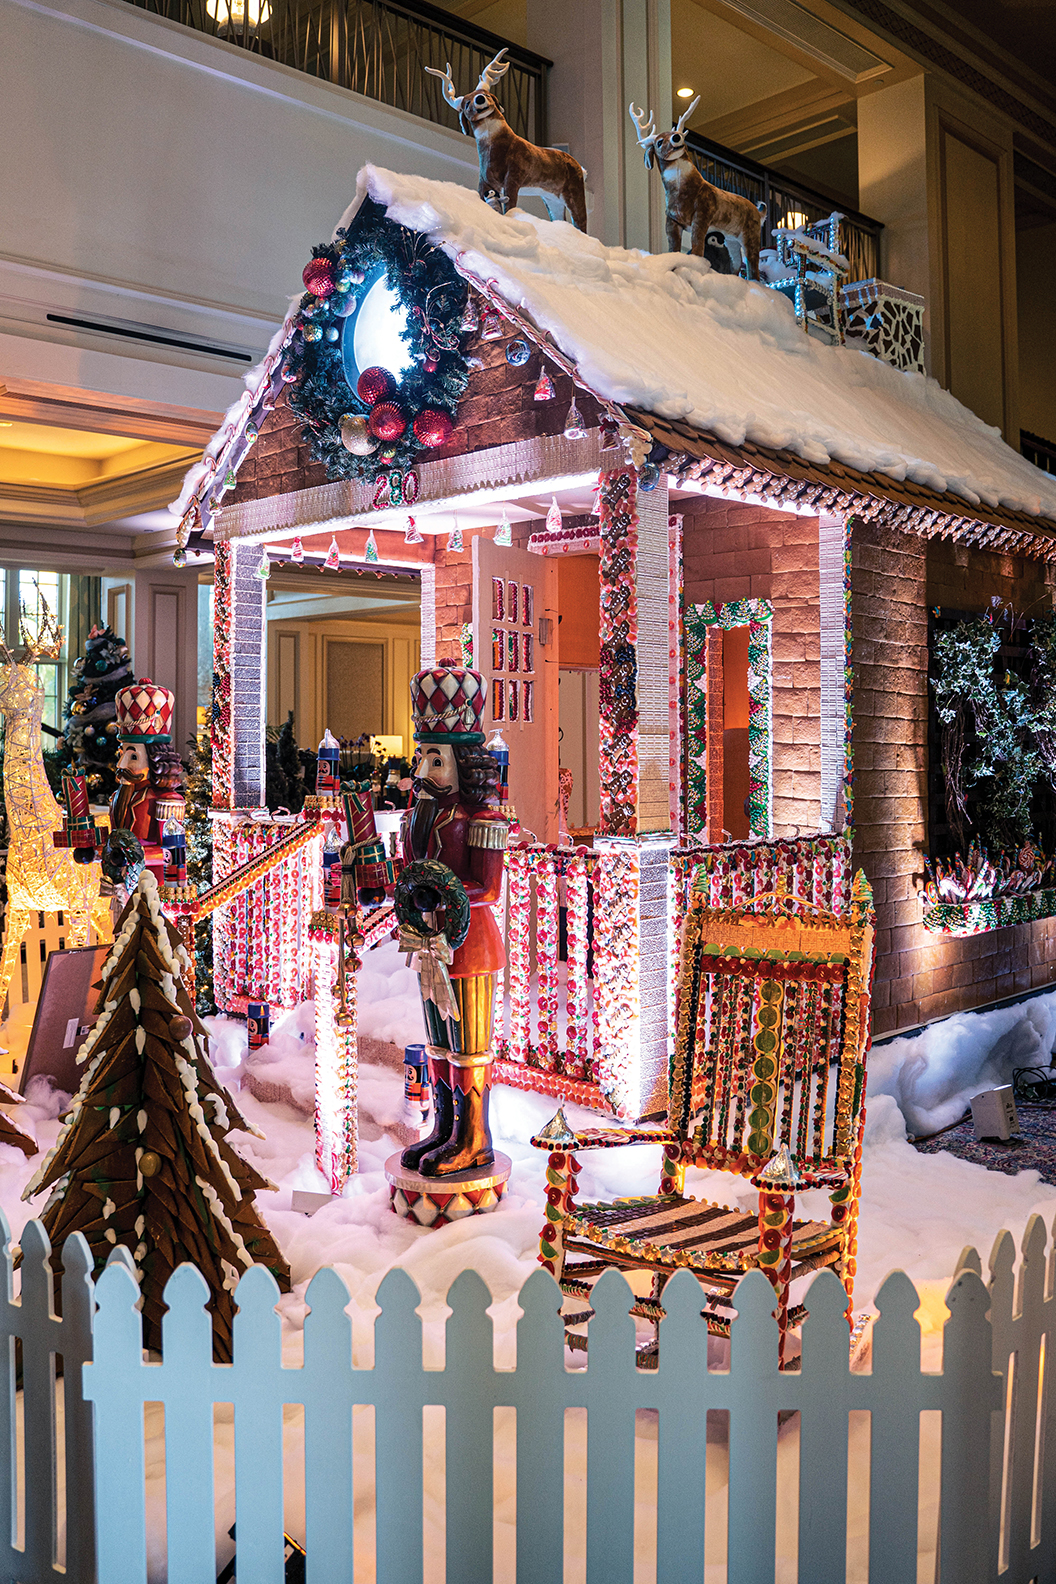 Gingerbread house setup in the main lobby of The Ritz Carlton, Naples